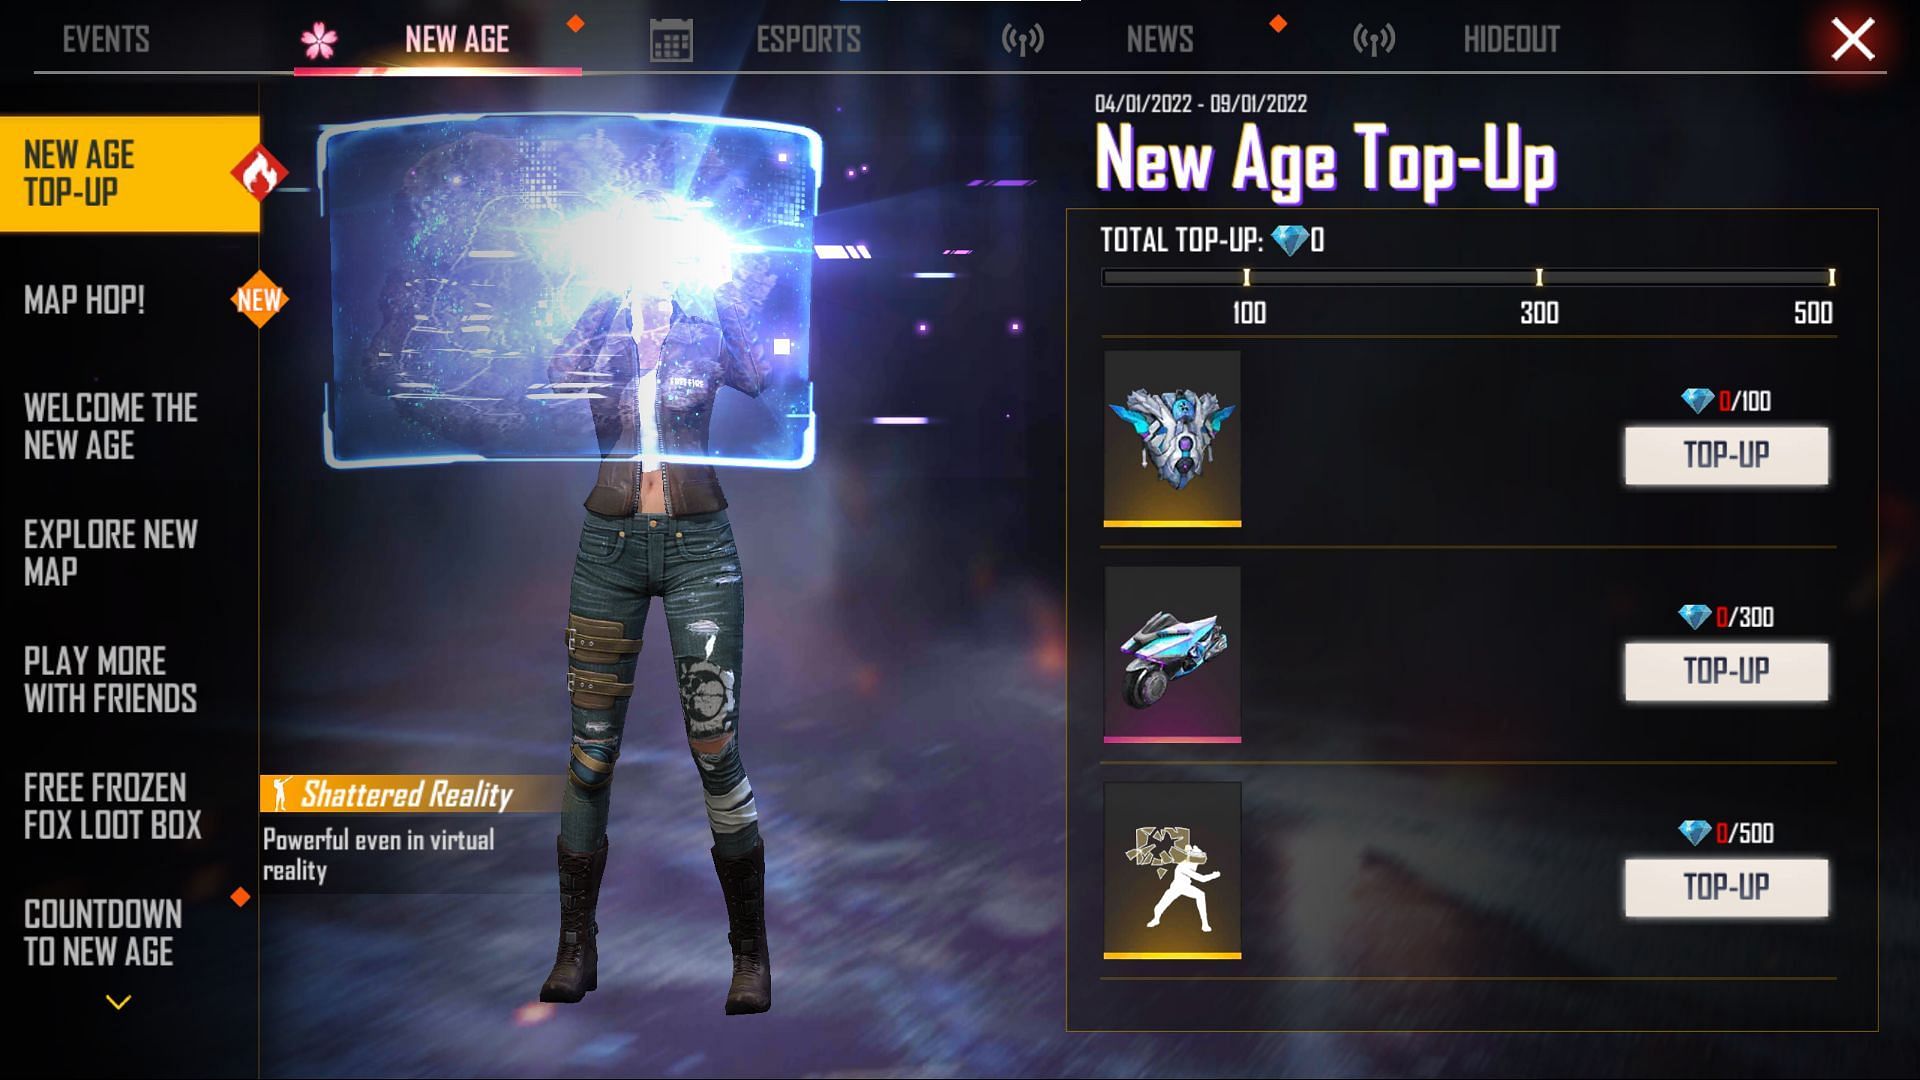 The New Age Top-Up event (Image via Free Fire)